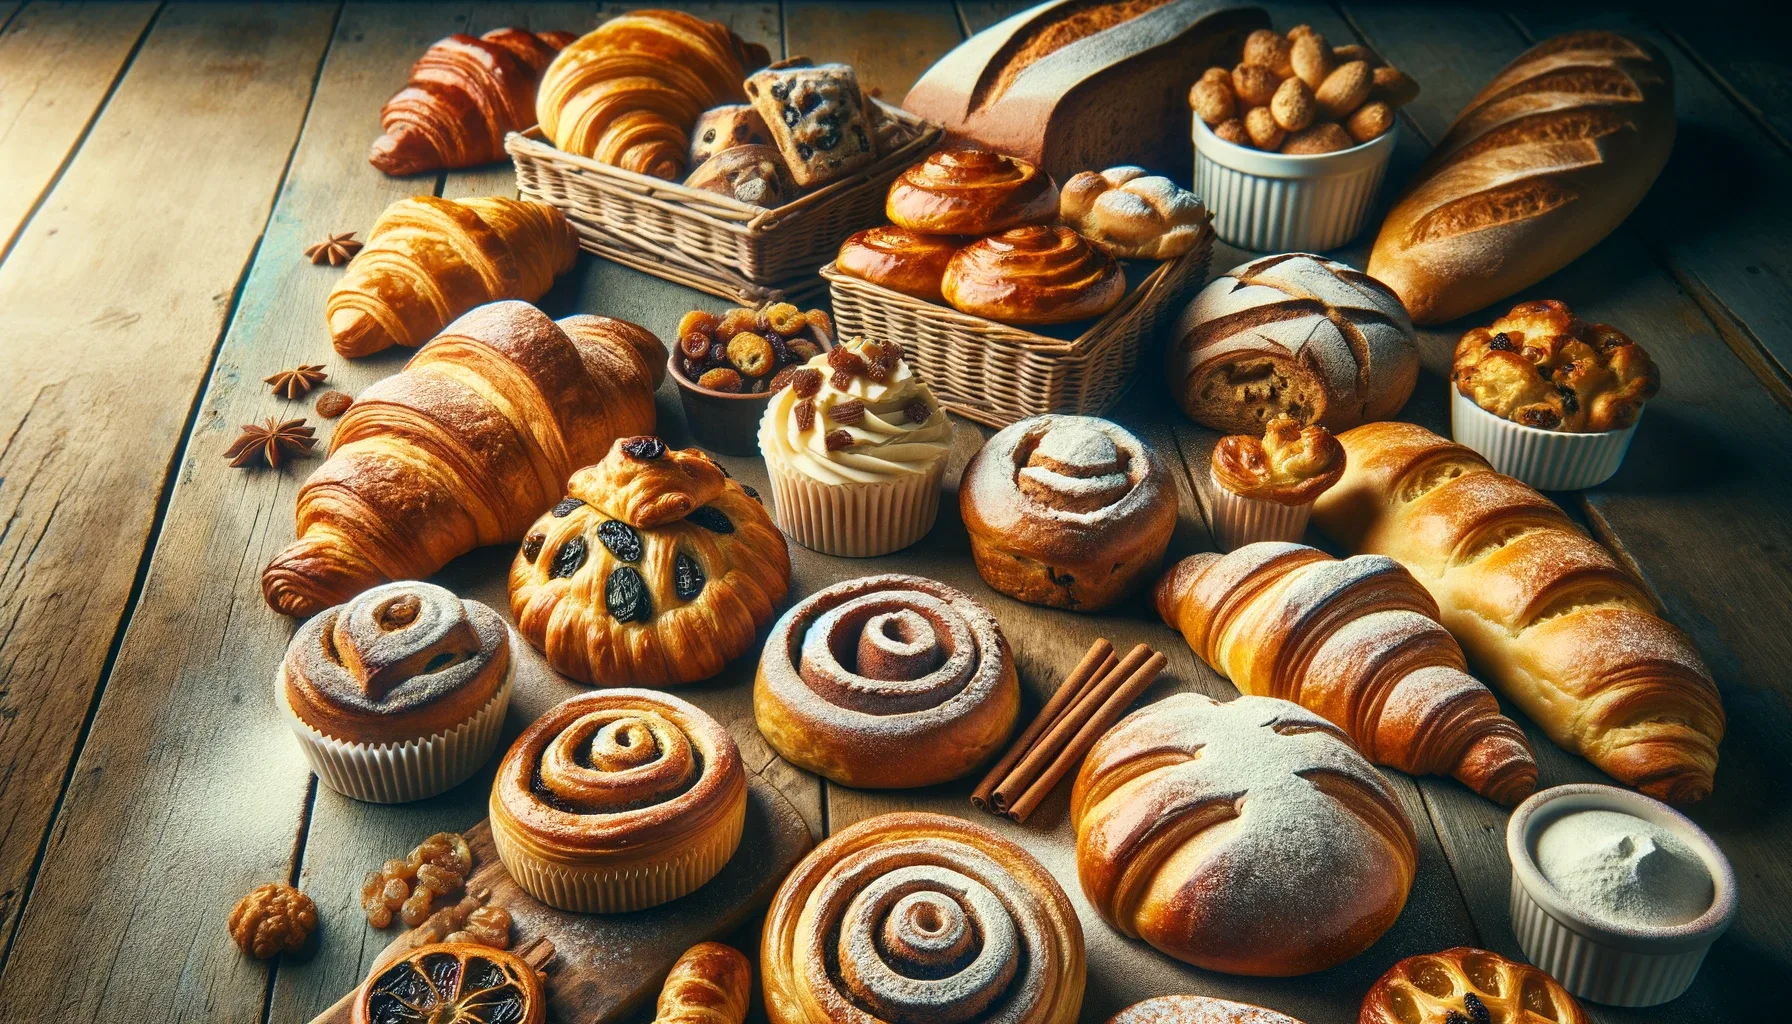 A selection of healthy, freshly-baked, bakery items produced with the Keto PowerFlax Baking Mix, as part of Food is Medicine.